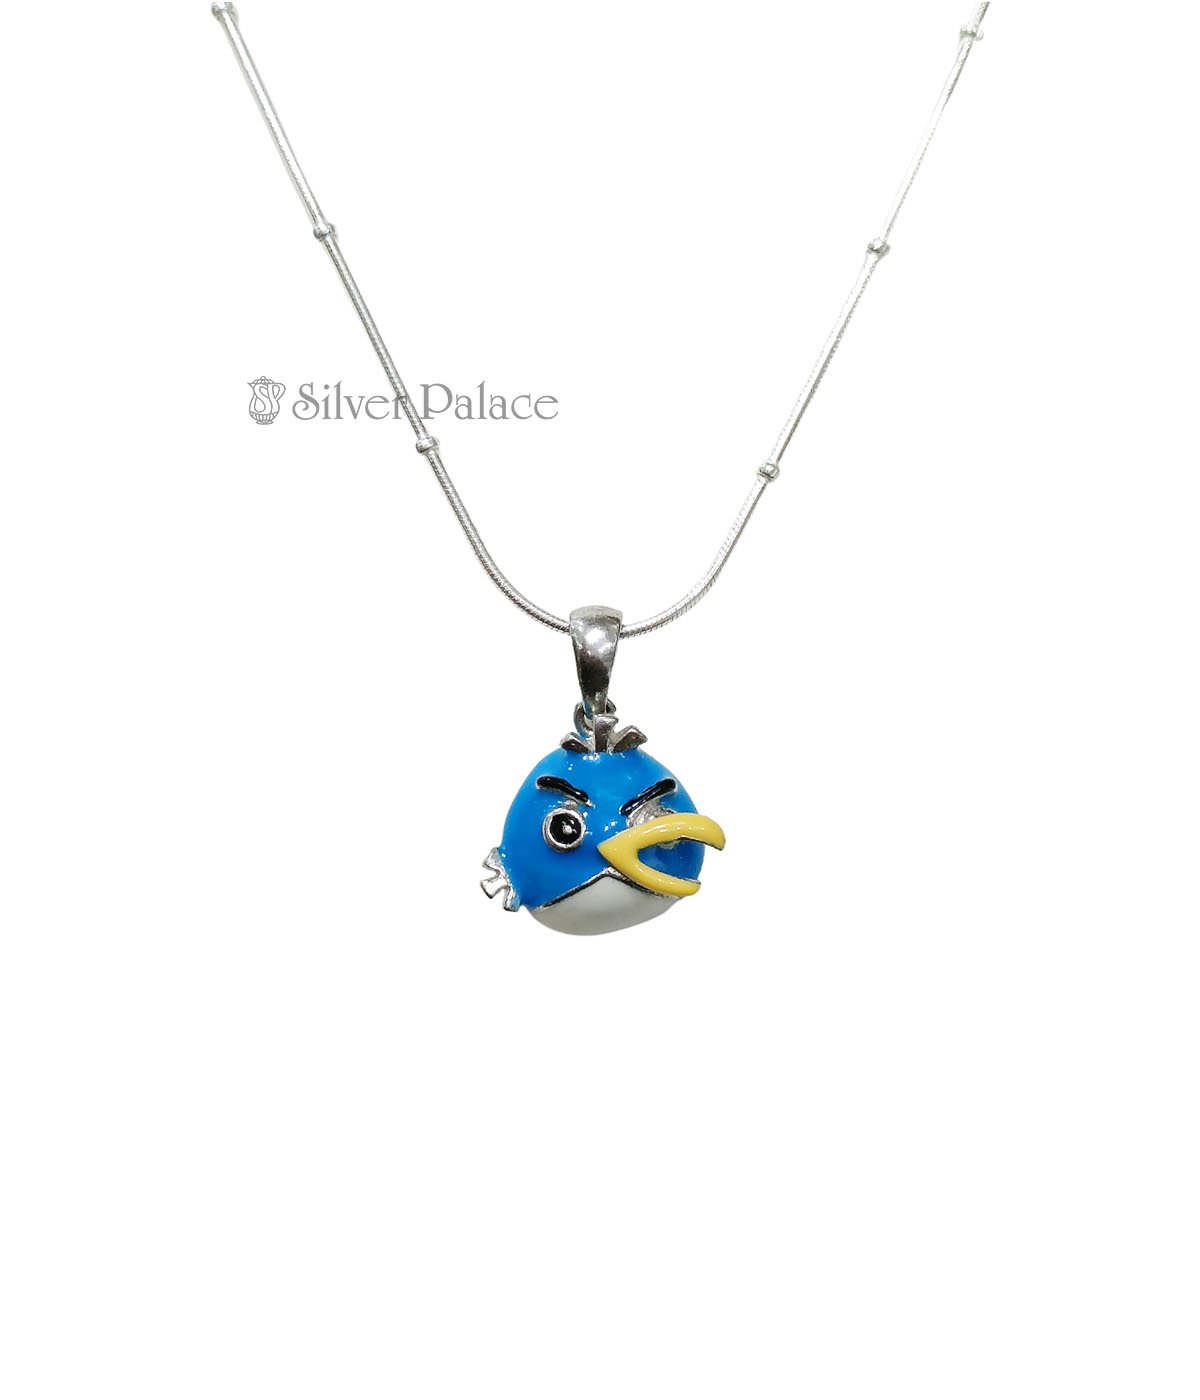 92.5 STERLING SILVER BLUE ANGRY BIRD PENDANT